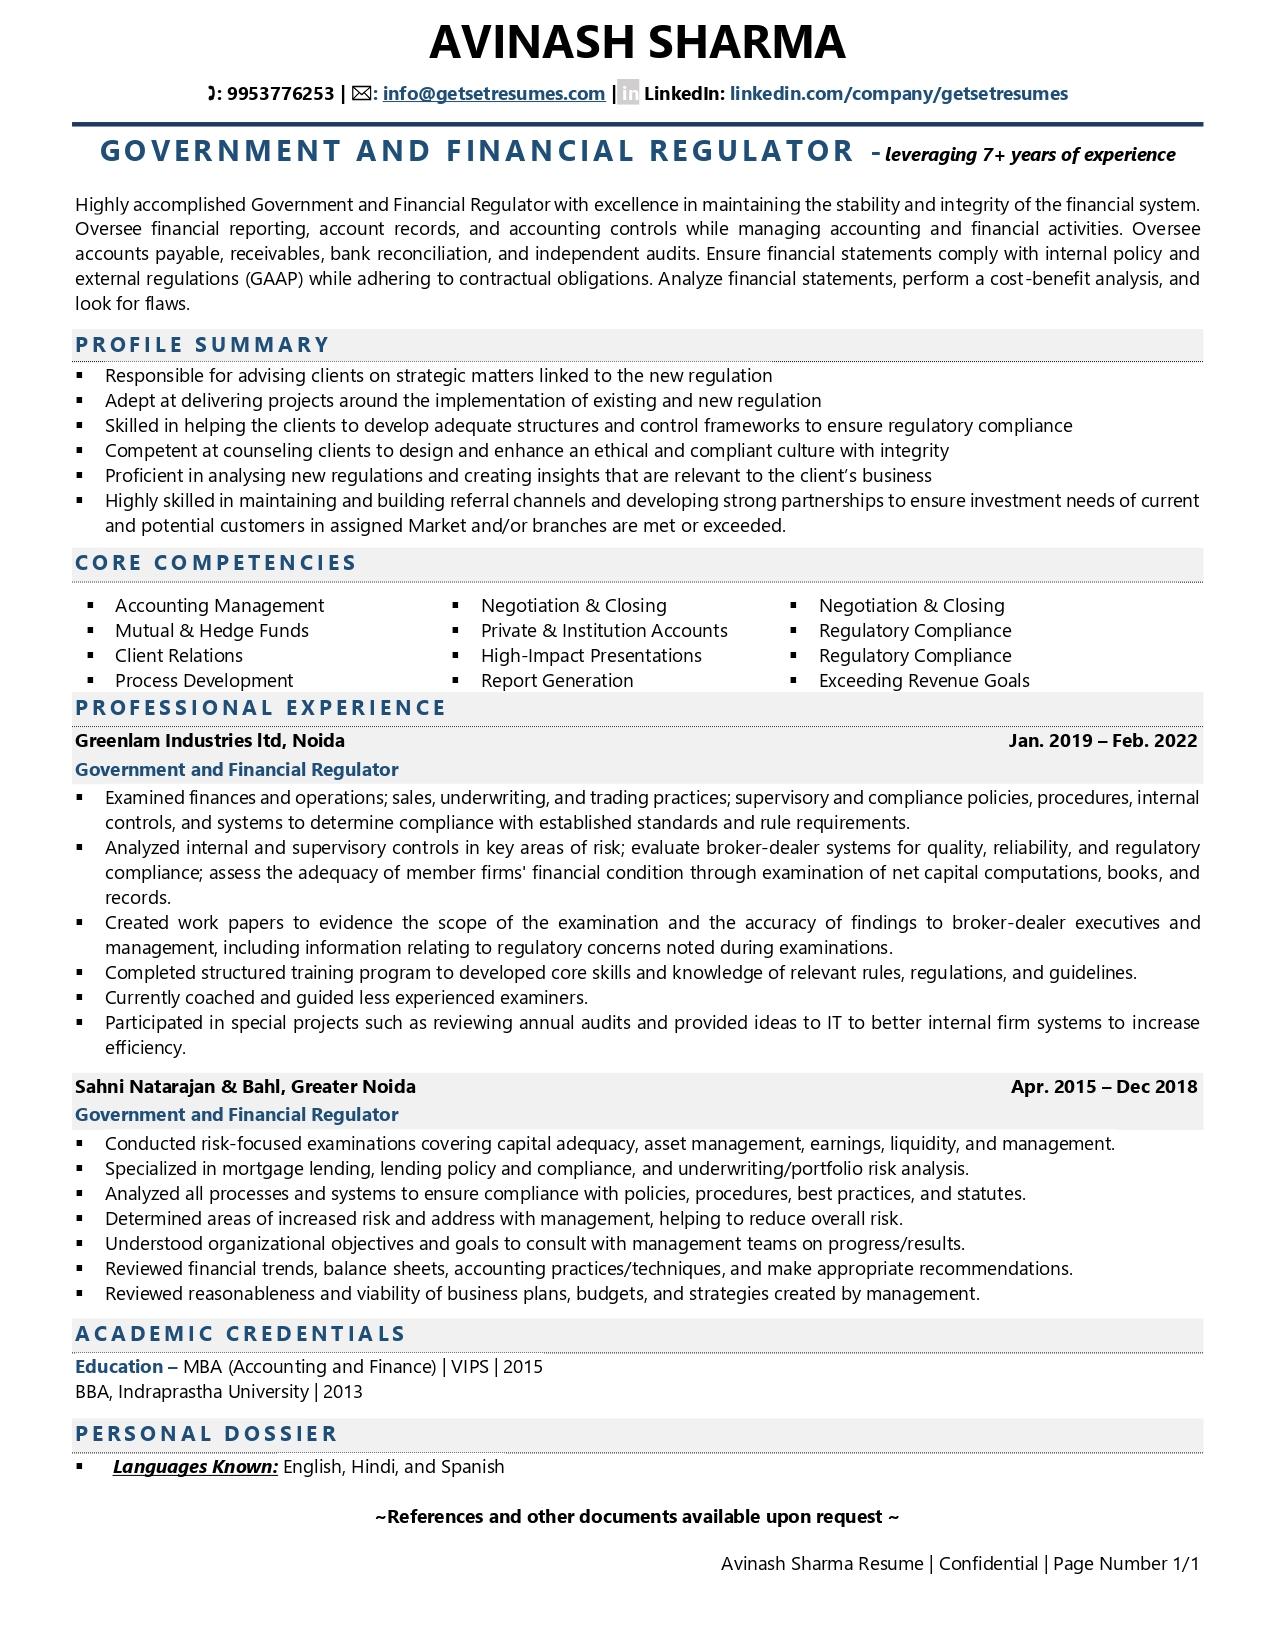 Government & Financial Regulator - Resume Example & Template